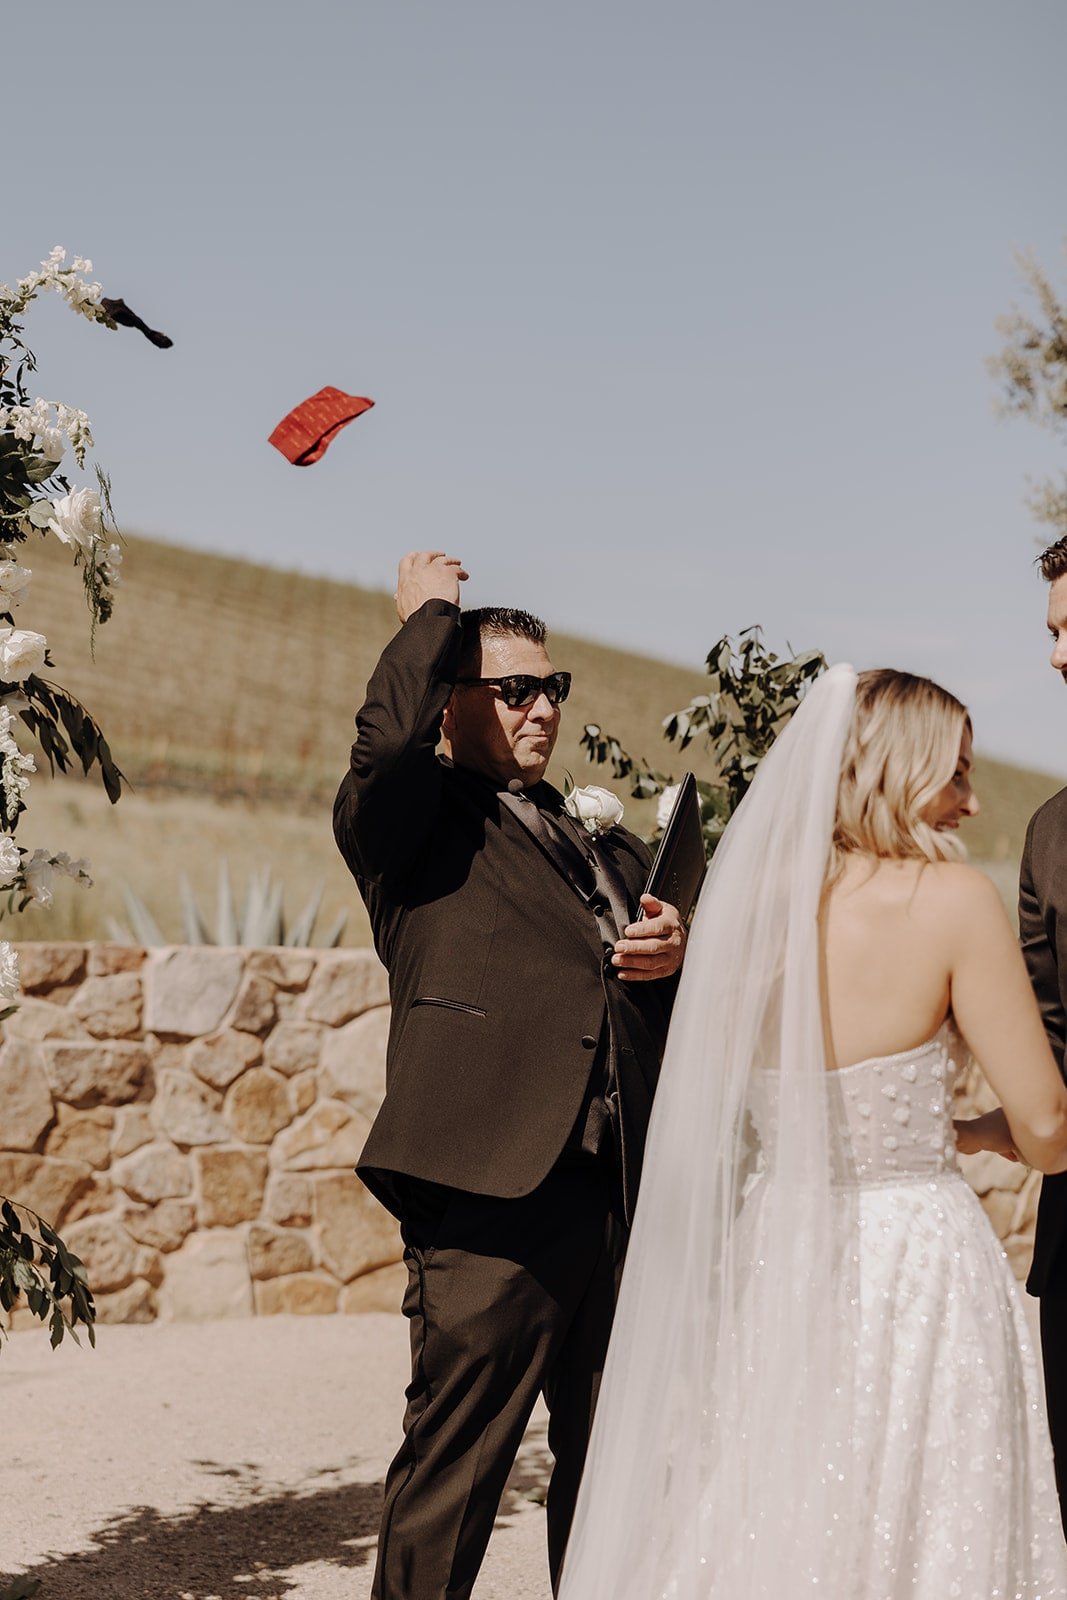 Officiant throws the wedding script at outdoor wedding ceremony in California